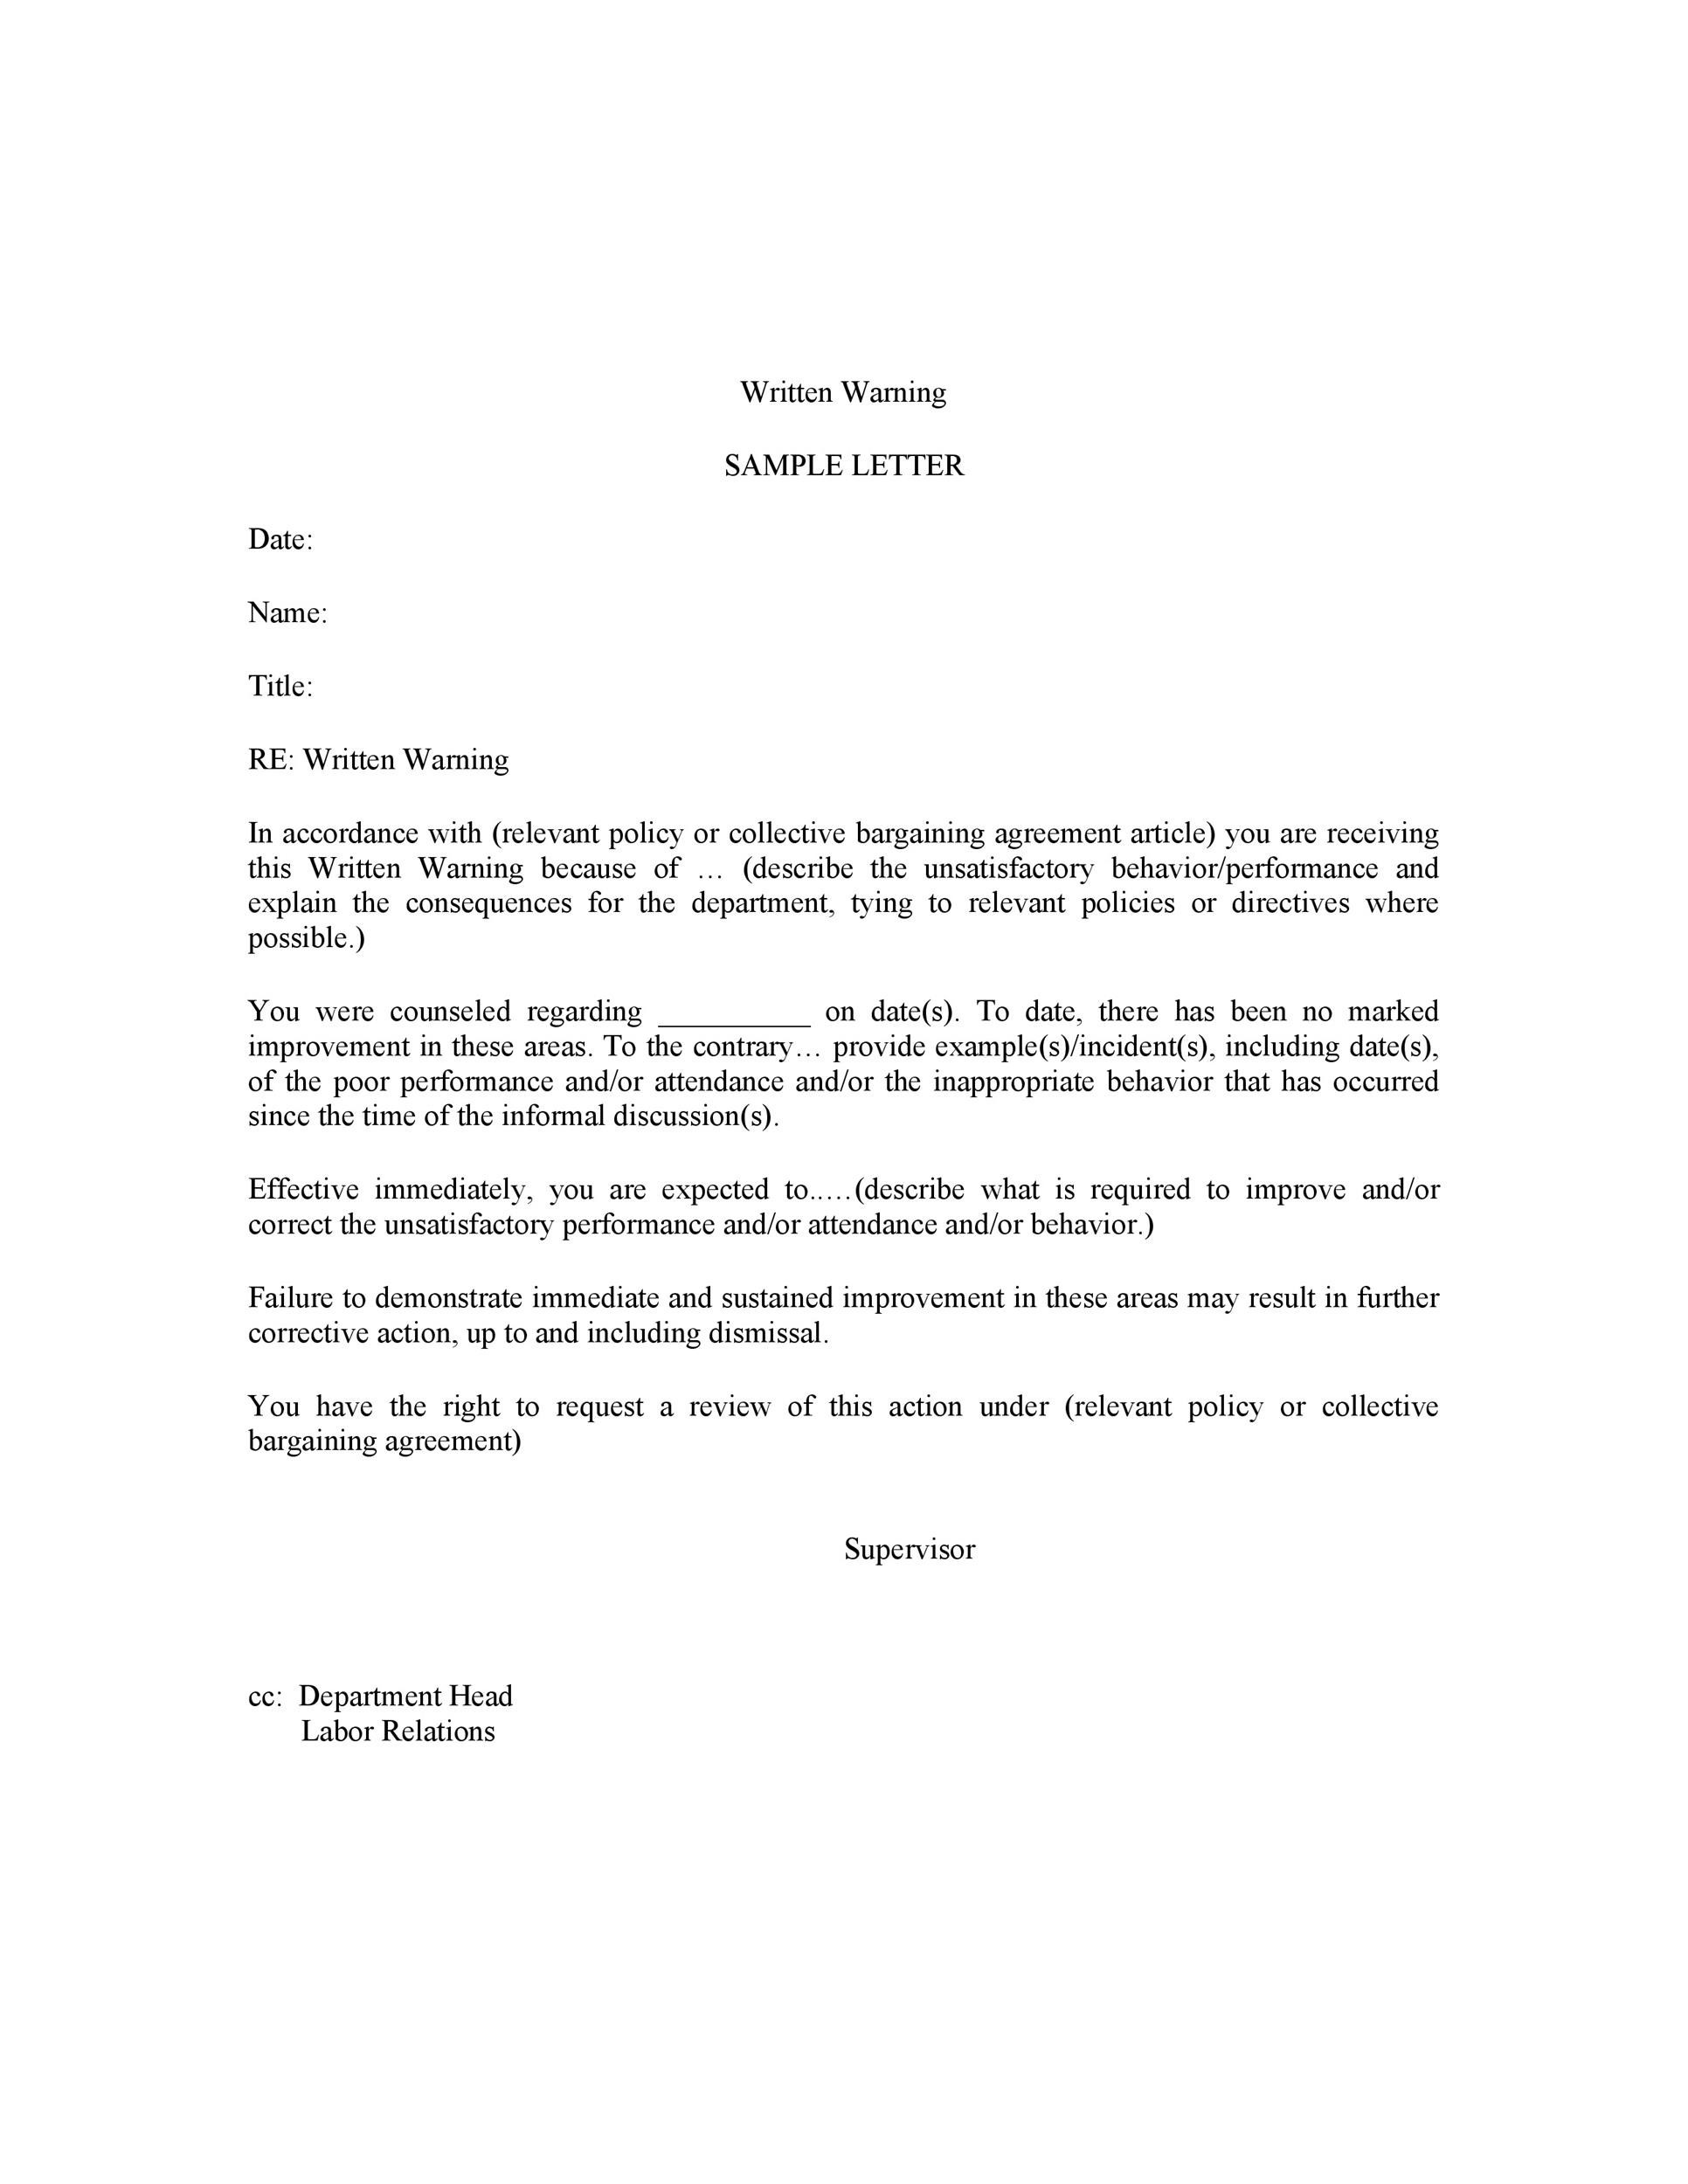 Employee Warning Letter Pdf from templatelab.com